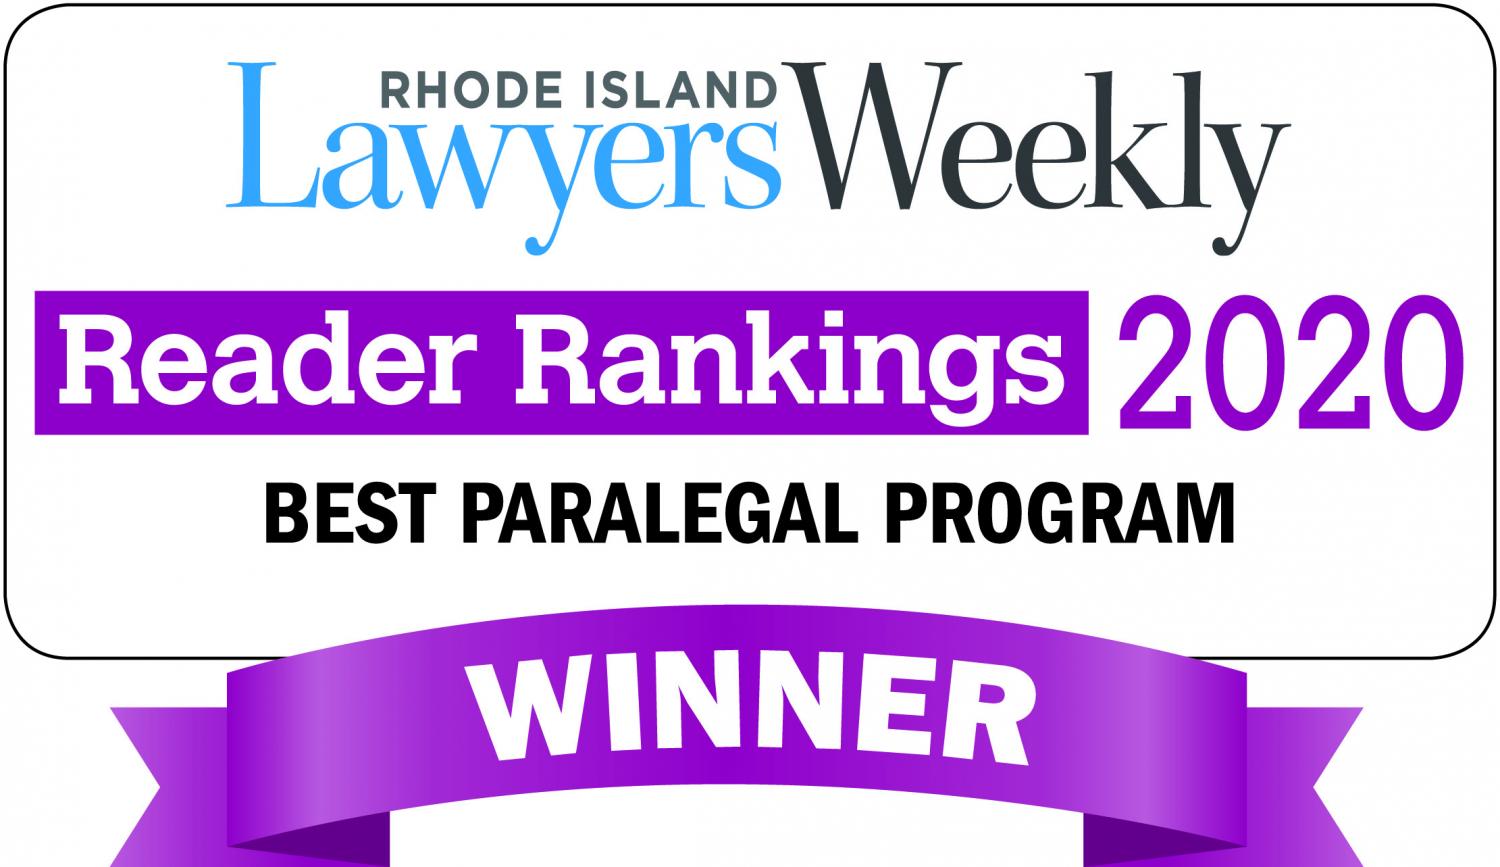 Voted Best Paralegal Program by Lawyer's Weekly 